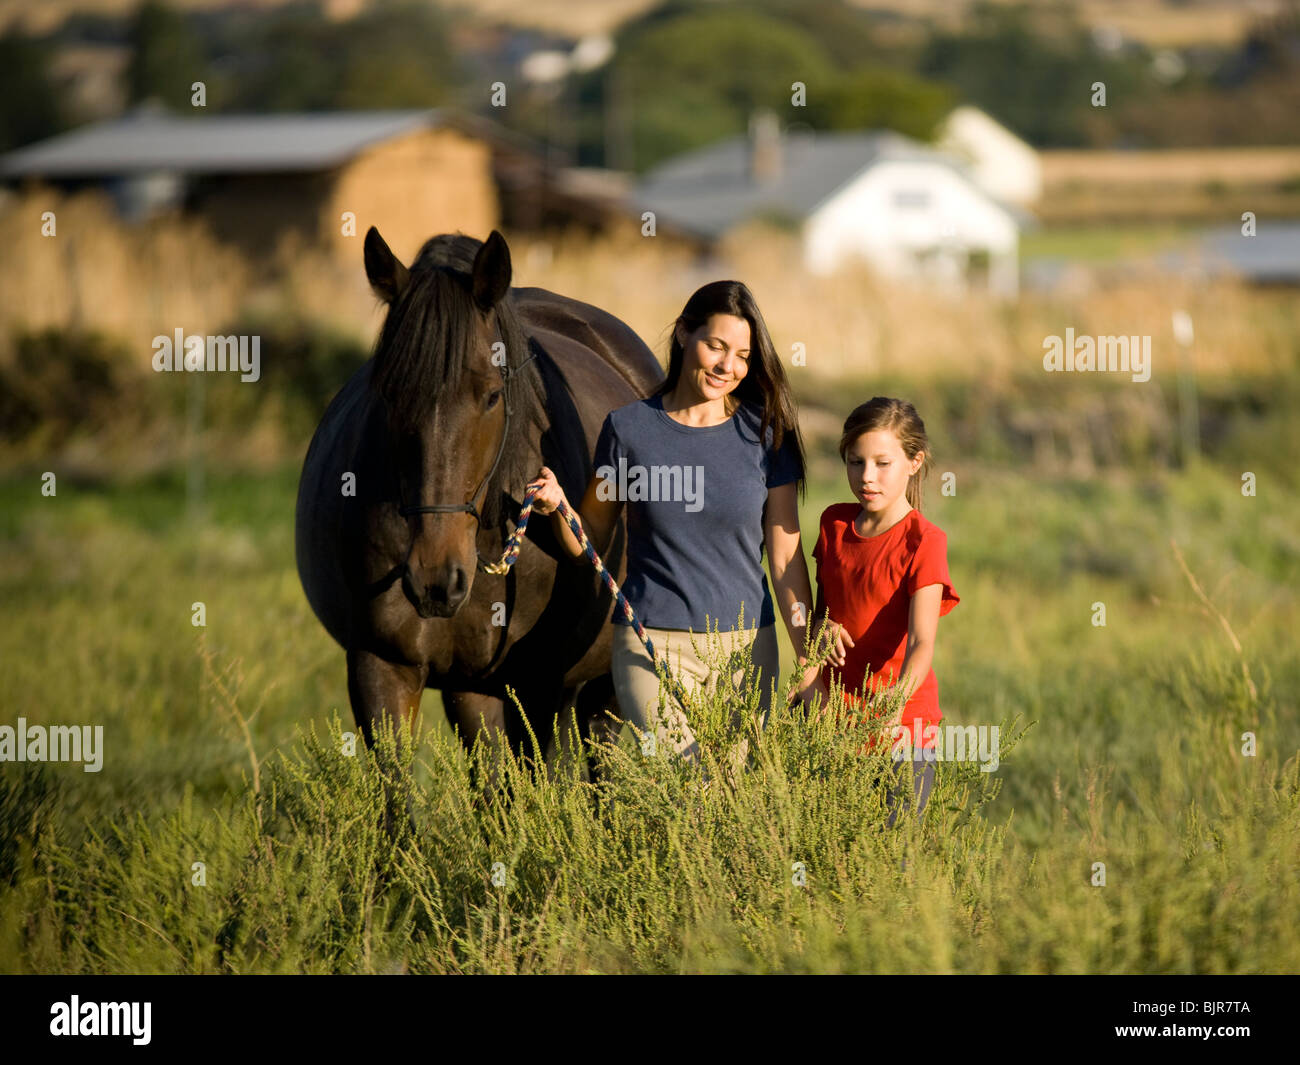 woman, girl, and a horse Stock Photo